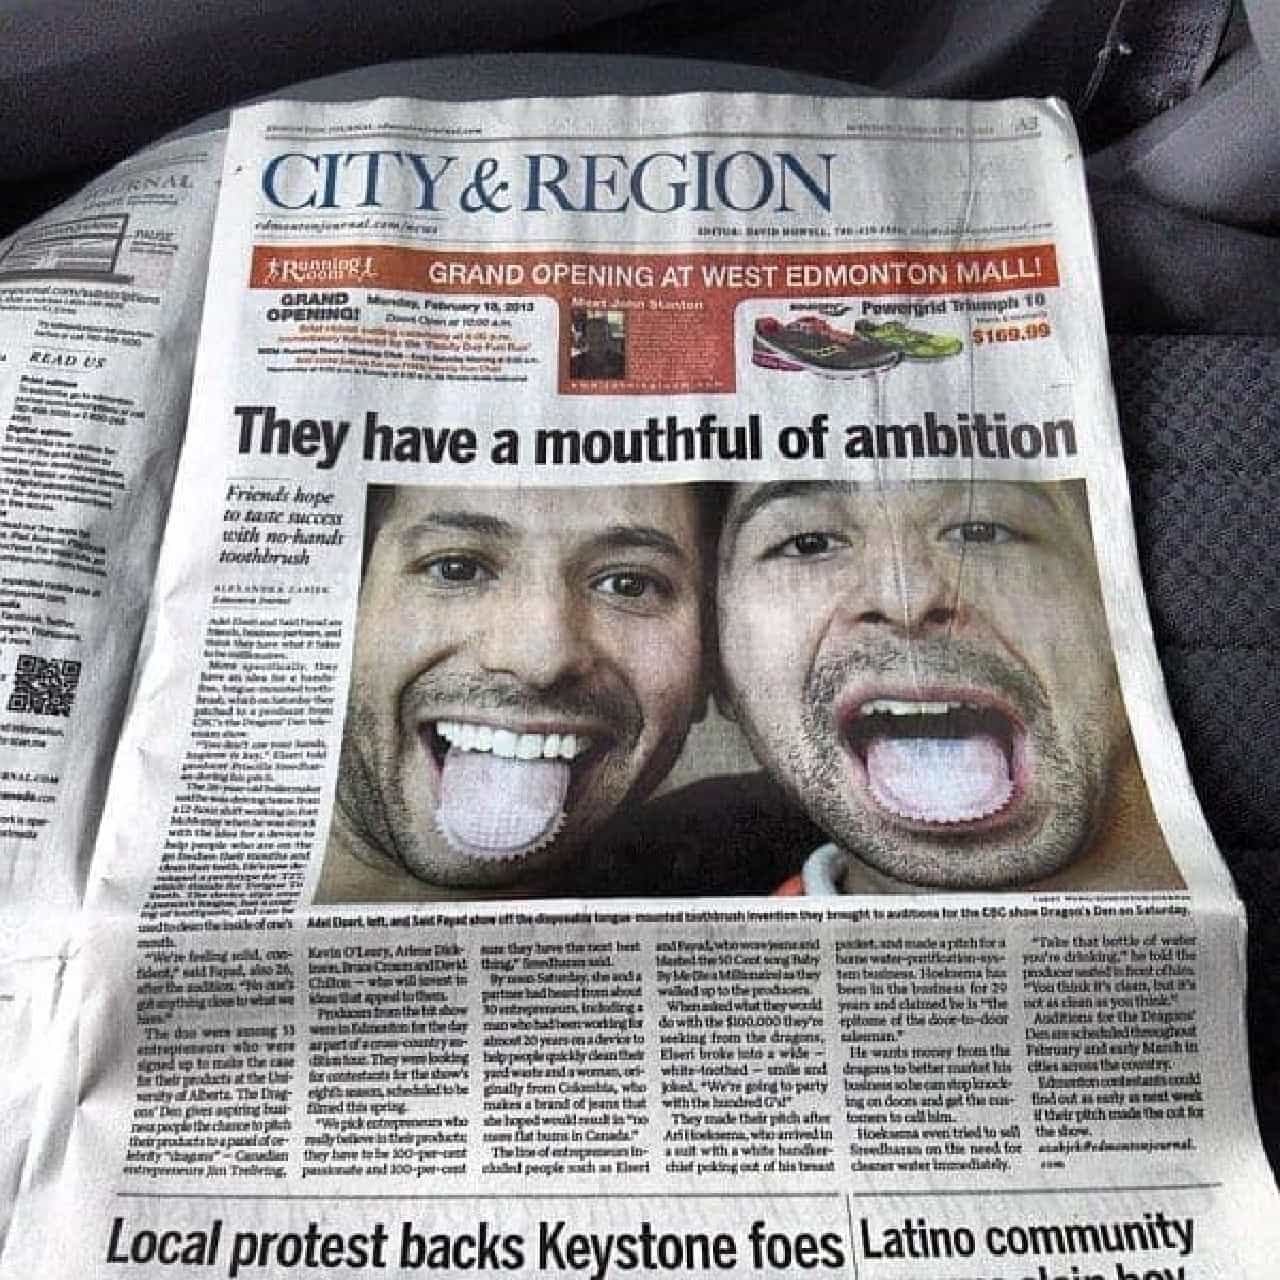 Adel Elseri (left photo) and Said Fayad (right photo) featured in a local newspaper